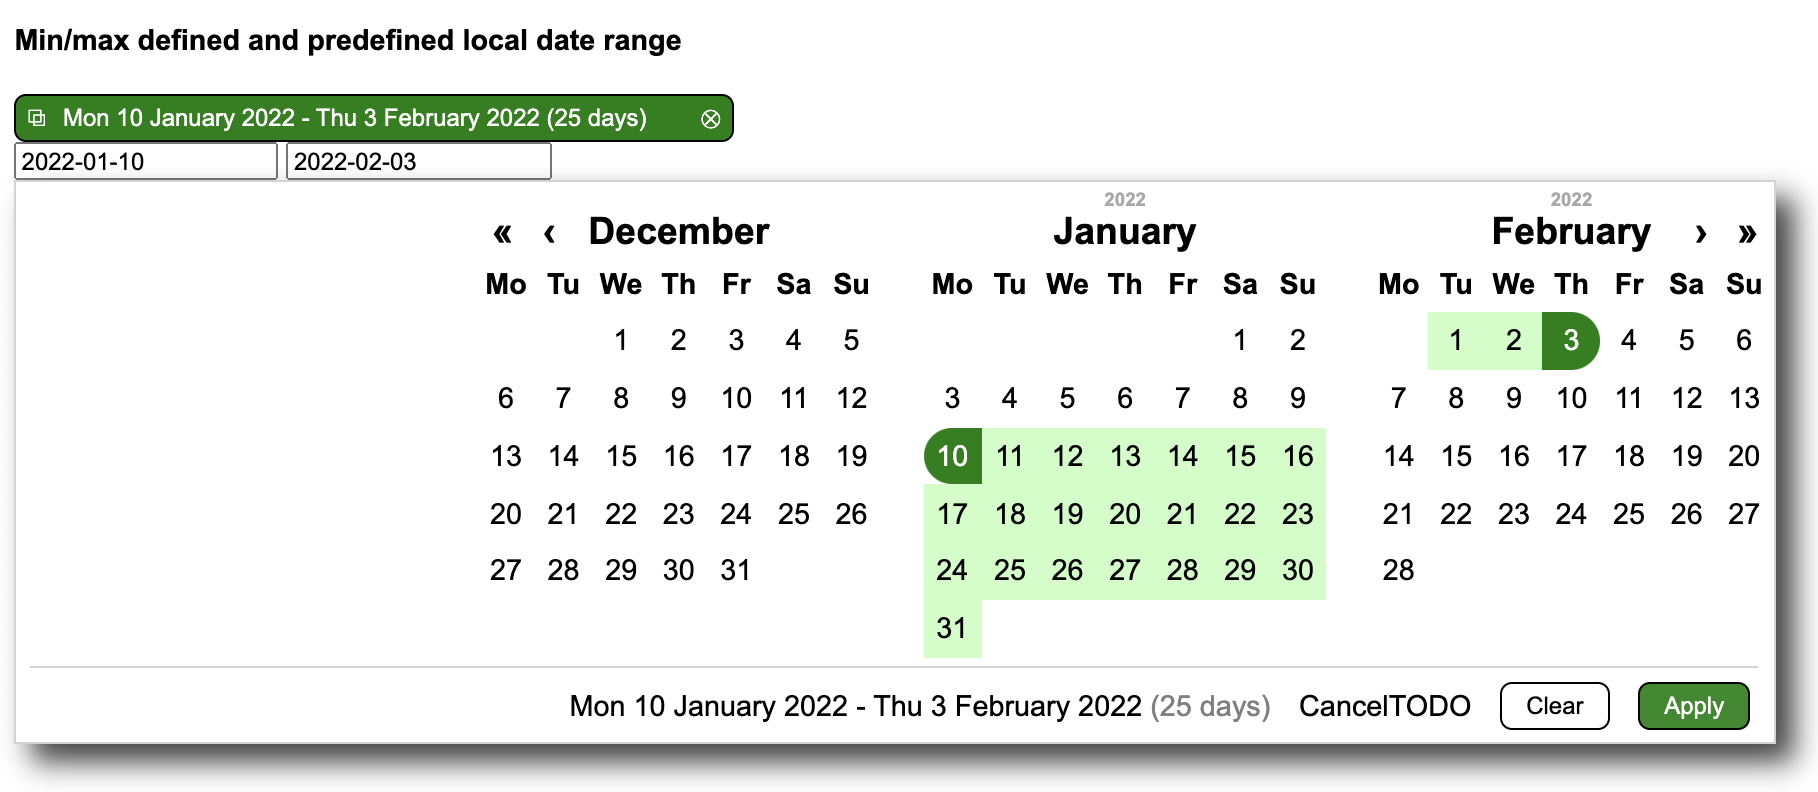 Early version of the local date range picker, with min/max and predefined selected range